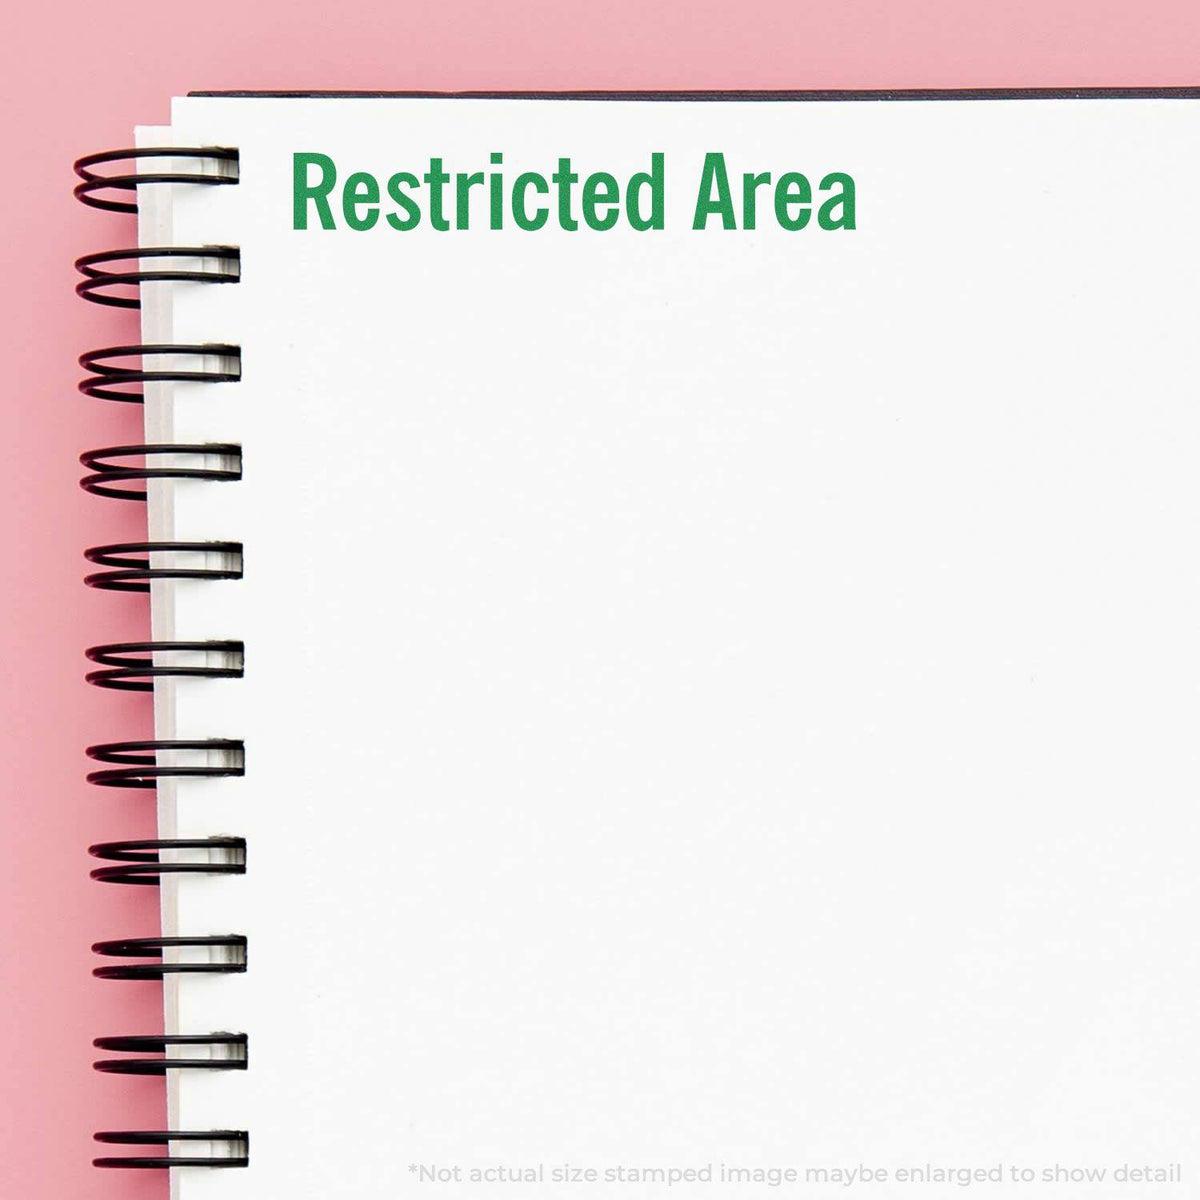 In Use Large Restricted Area Rubber Stamp Image